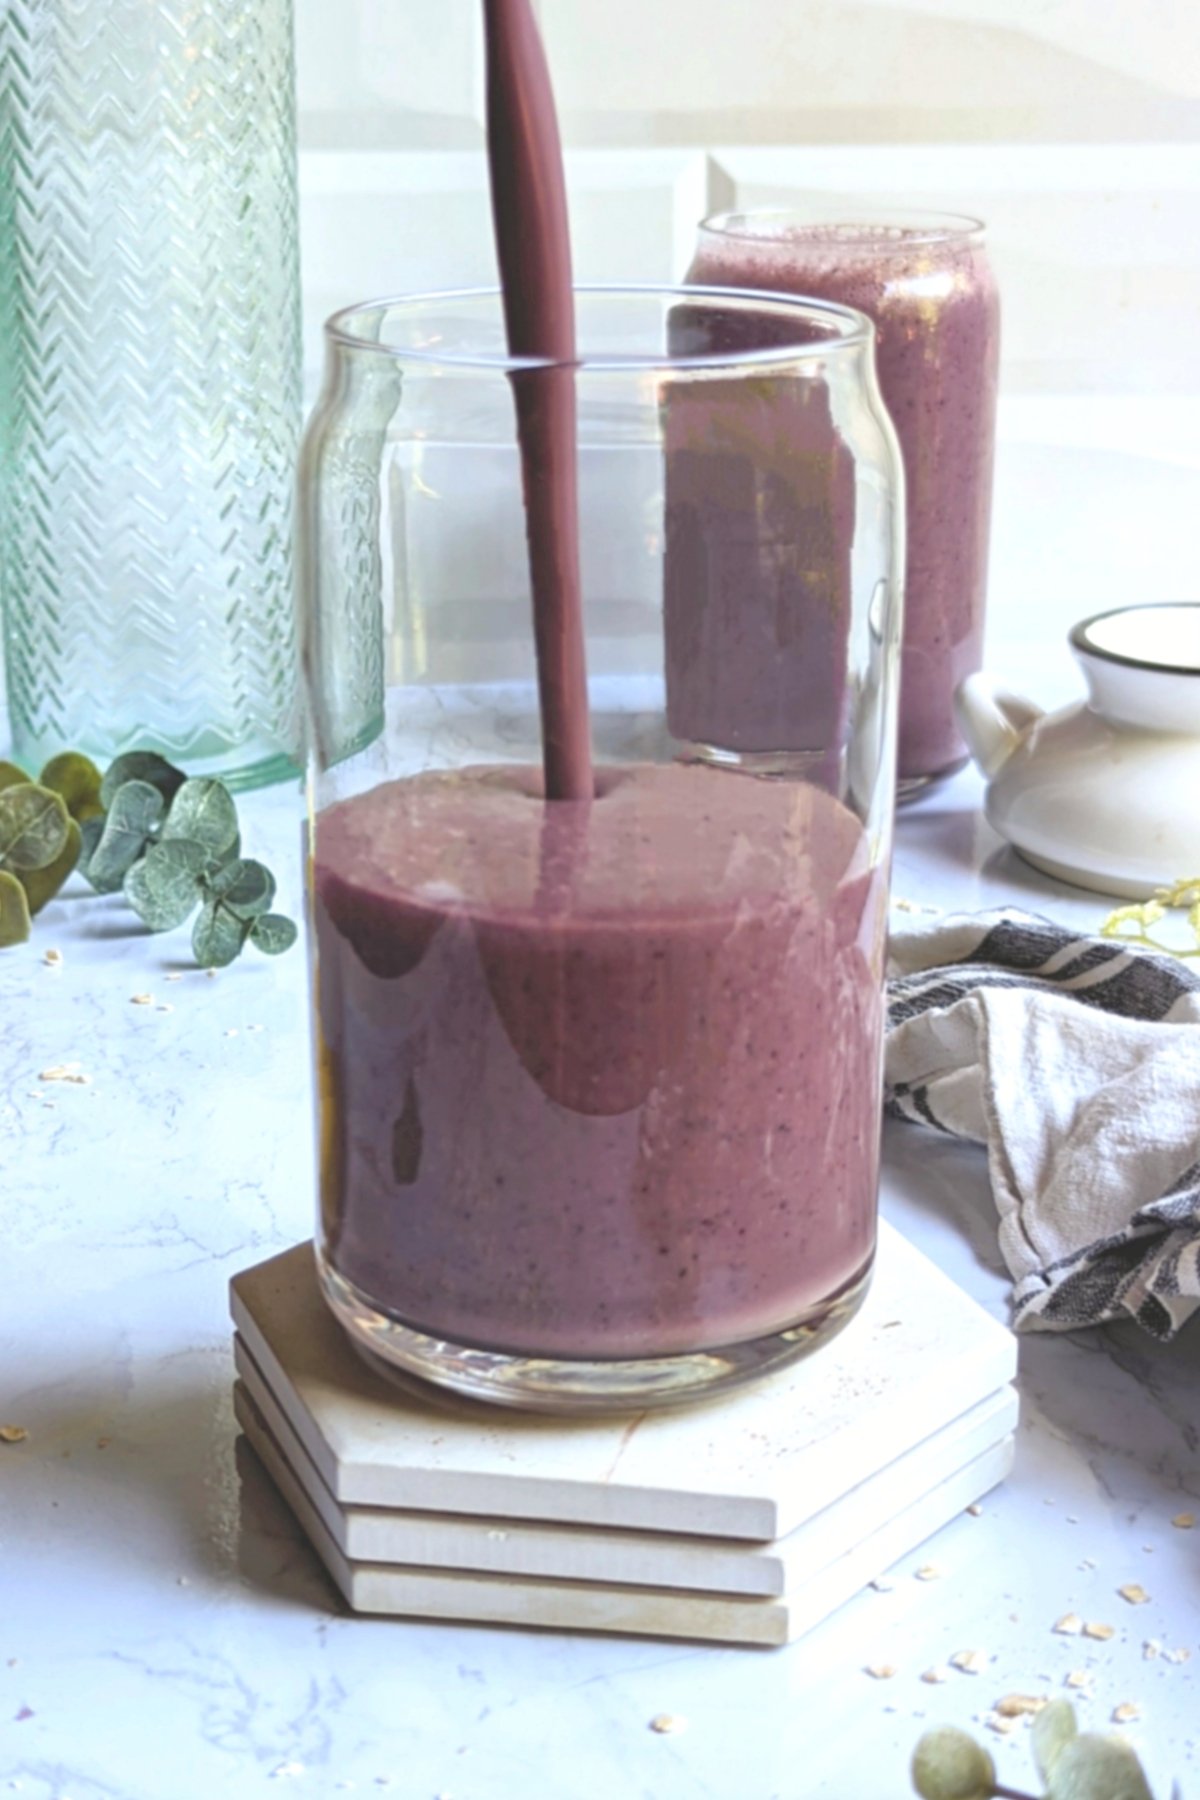 weight loss smoothie with oats recipe healthy high fiber breakfast smoothie with blueberries flax seed and water